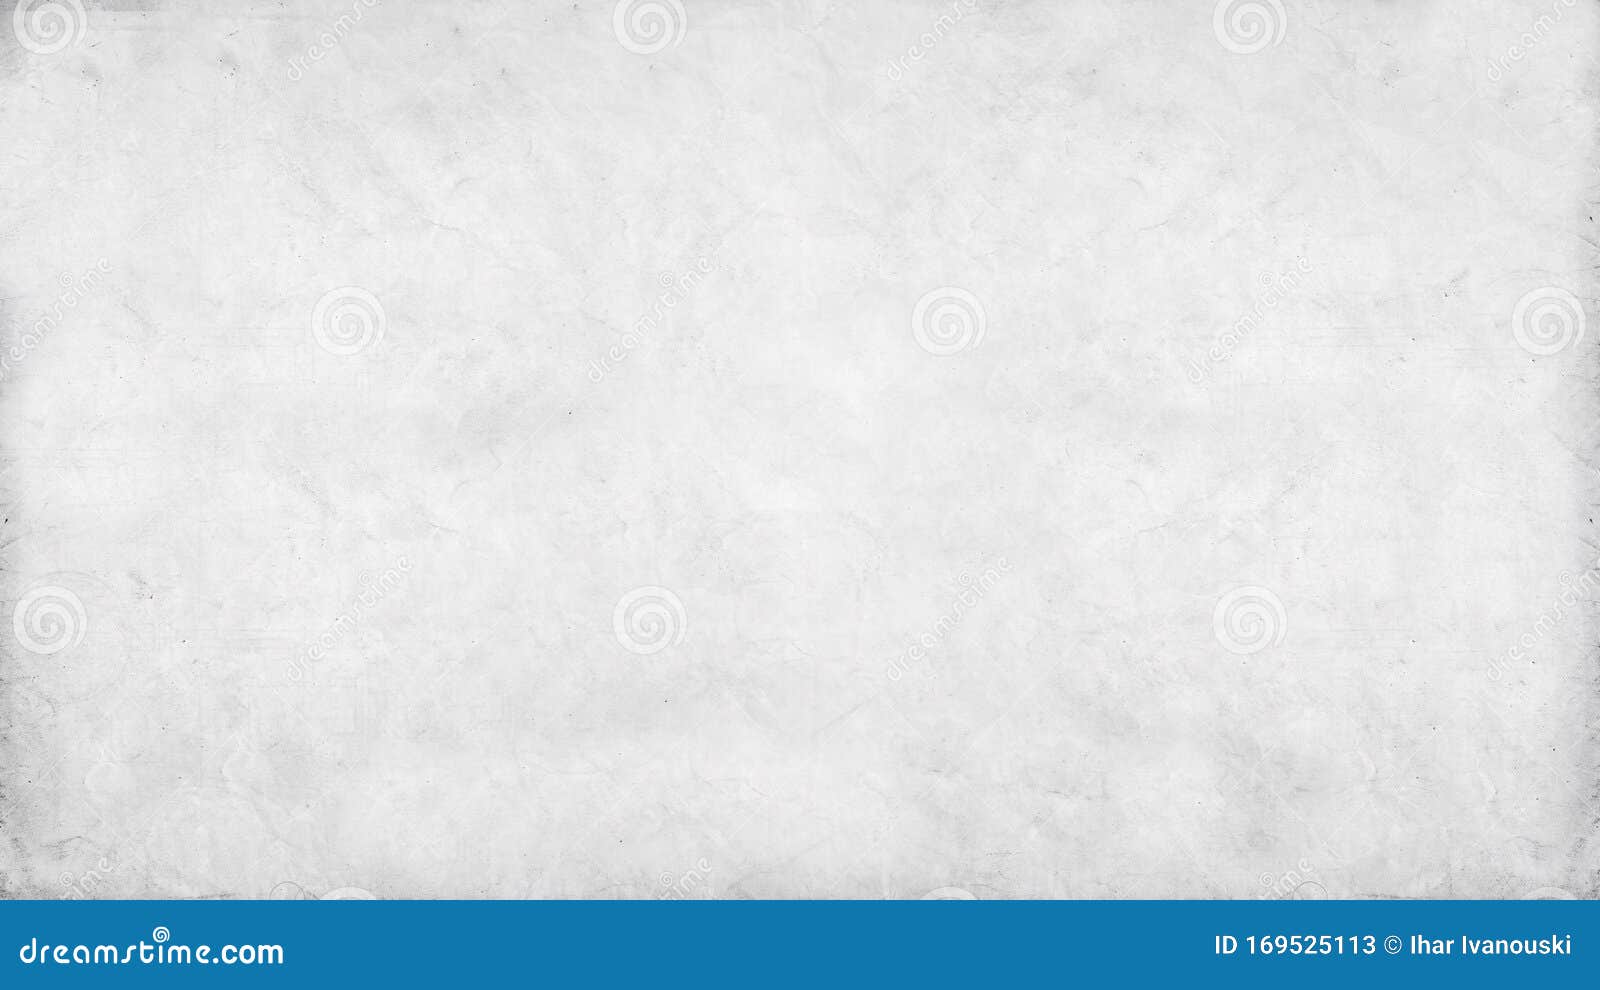 Aged White Parchment Paper with a Textured Surface .Texture or Background  Stock Image - Image of document, dirt: 169525113